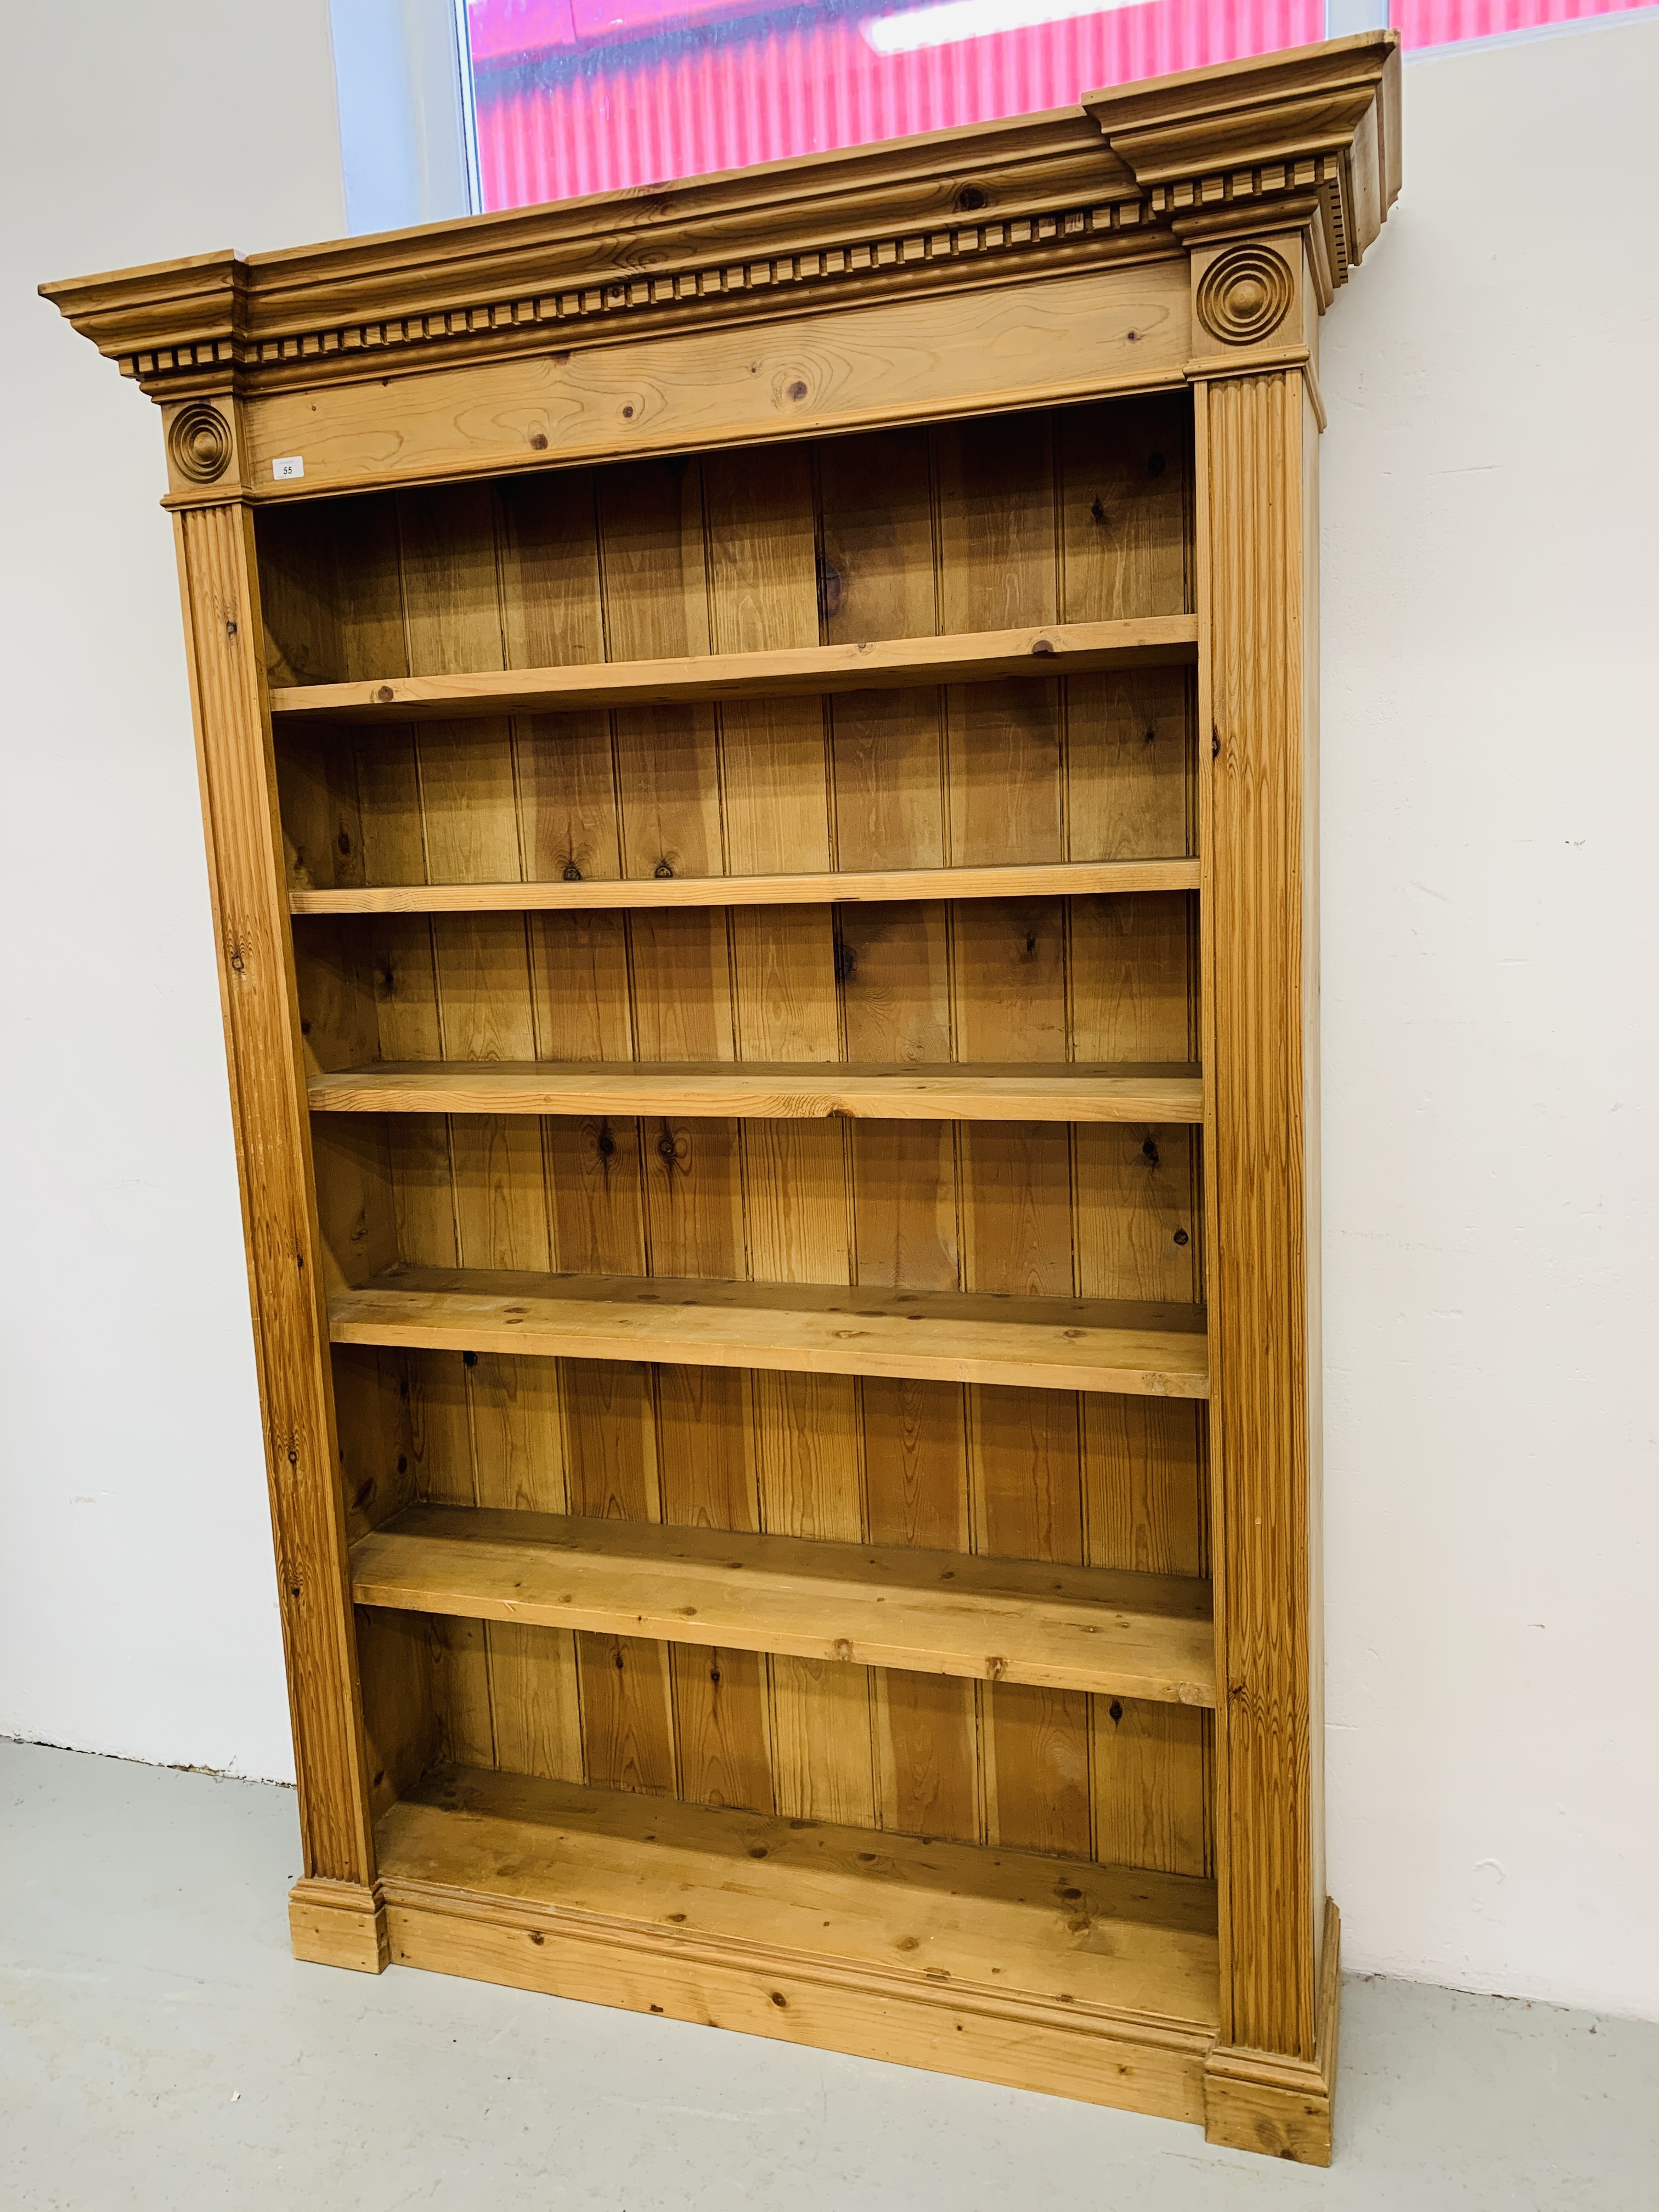 A SOLID WAXED PINE FULL HEIGHT BOOKSHELF - H 198 CM. W 138CM. - Image 2 of 5